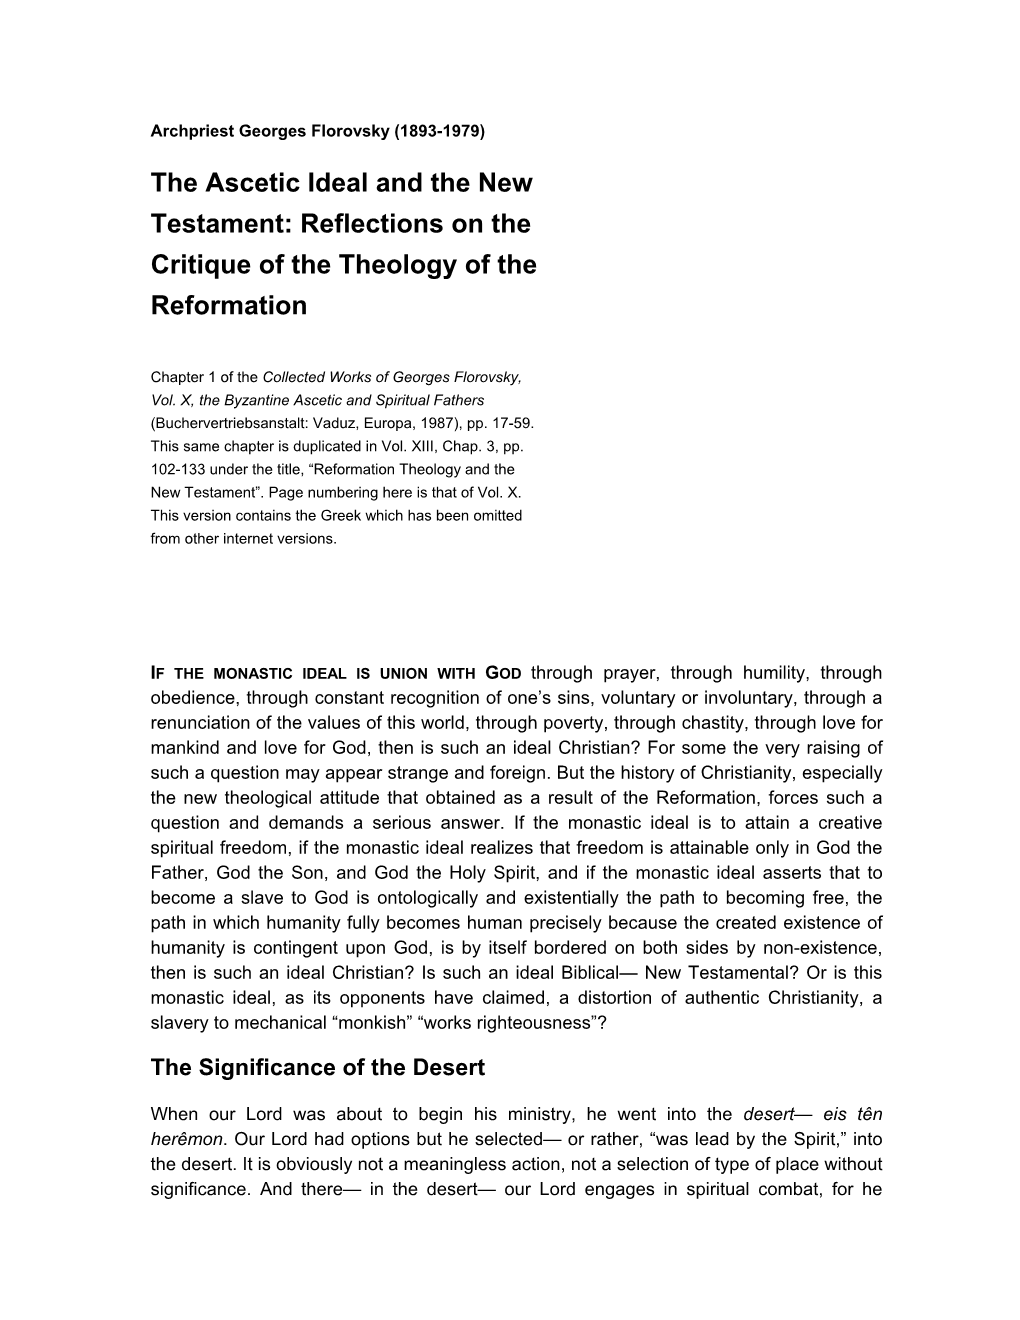 The Ascetic Ideal and the New Testament: Reflections on the Critique of the Theology of the Reformation